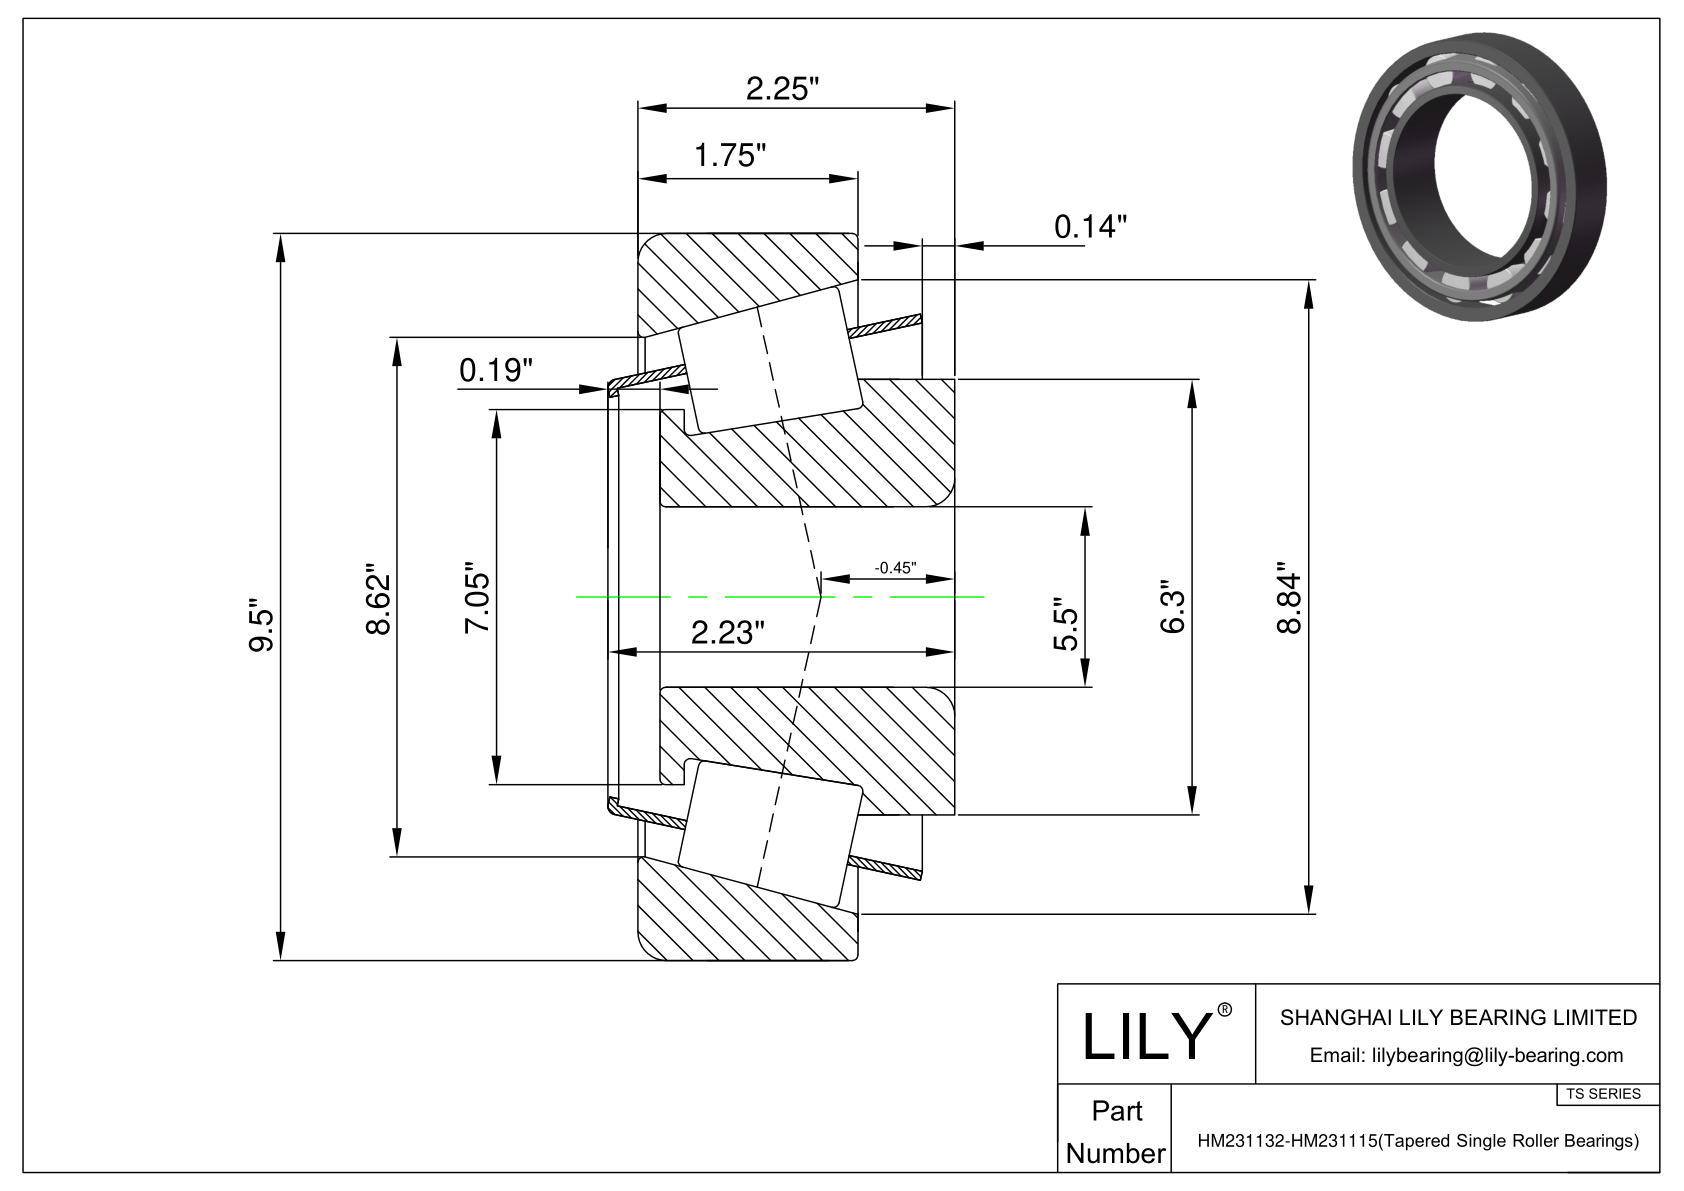 HM231132-HM231115 TS (Tapered Single Roller Bearings) (Imperial) cad drawing